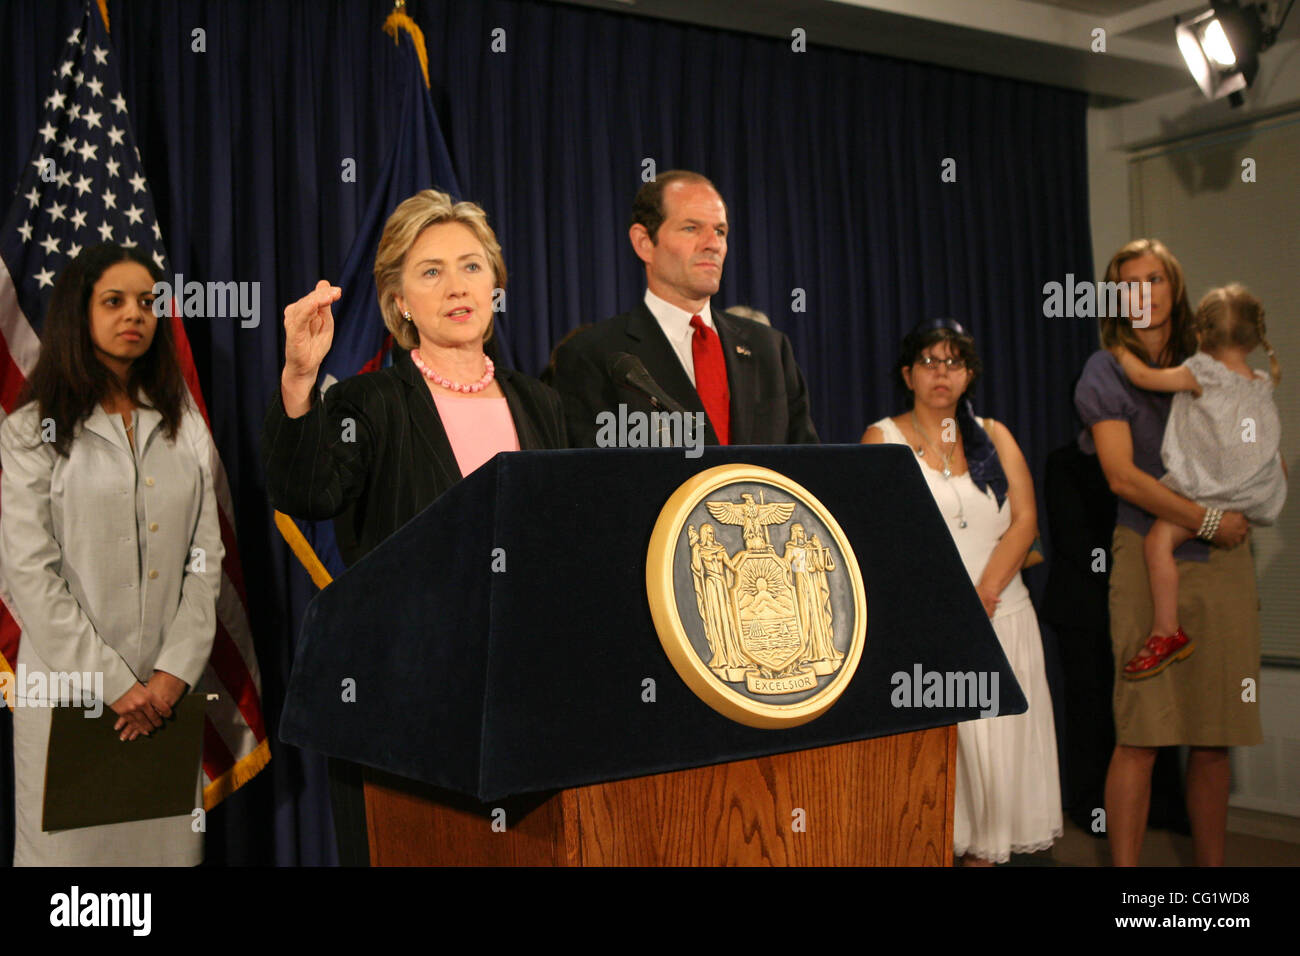 NY Governor Eliot Spitzer is joined by NY Senator Hillary Clinton to call on President Bush to reverse federal policy denying health care coverage to thousands of ininsured children at the Governo's office in Midtown Manhattan Aug. 30, 2007. Photo Credit: Mariela Lombard/ ZUMA Press. Stock Photo